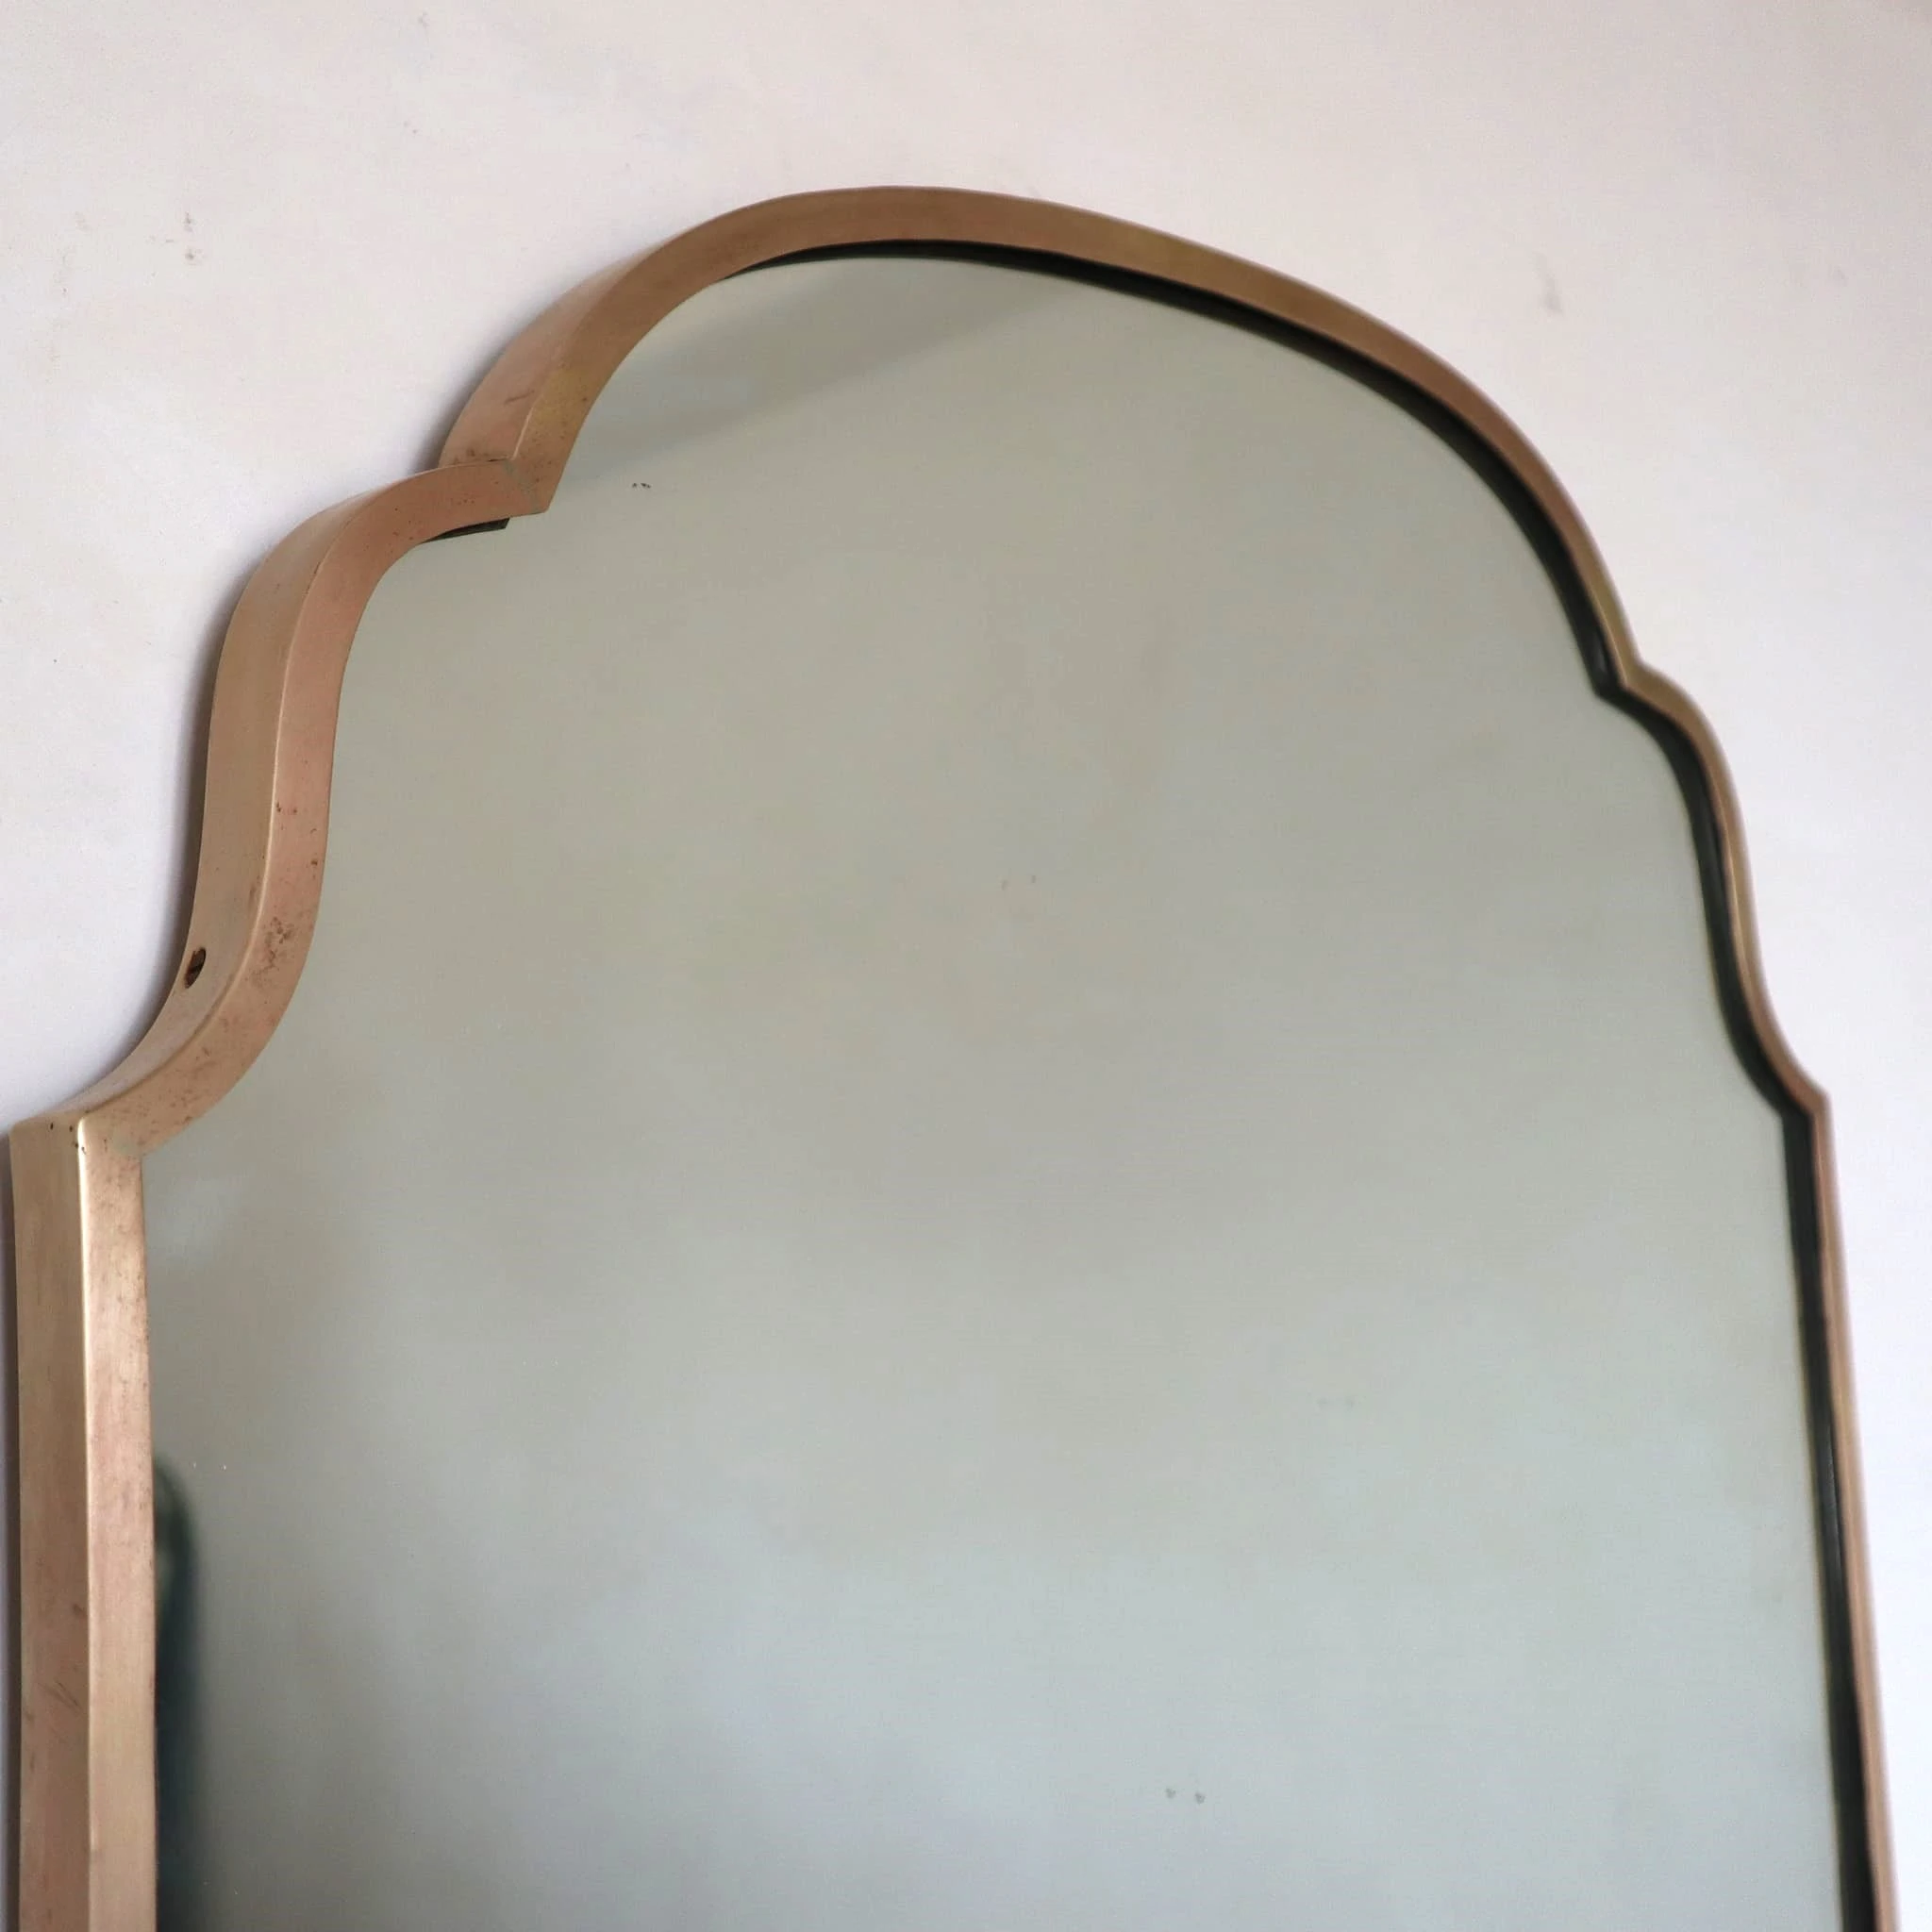 visionidepoca-modern-antique-vintage-mirror-shaped-rounded-shield-1960s-top-detail-view-brass